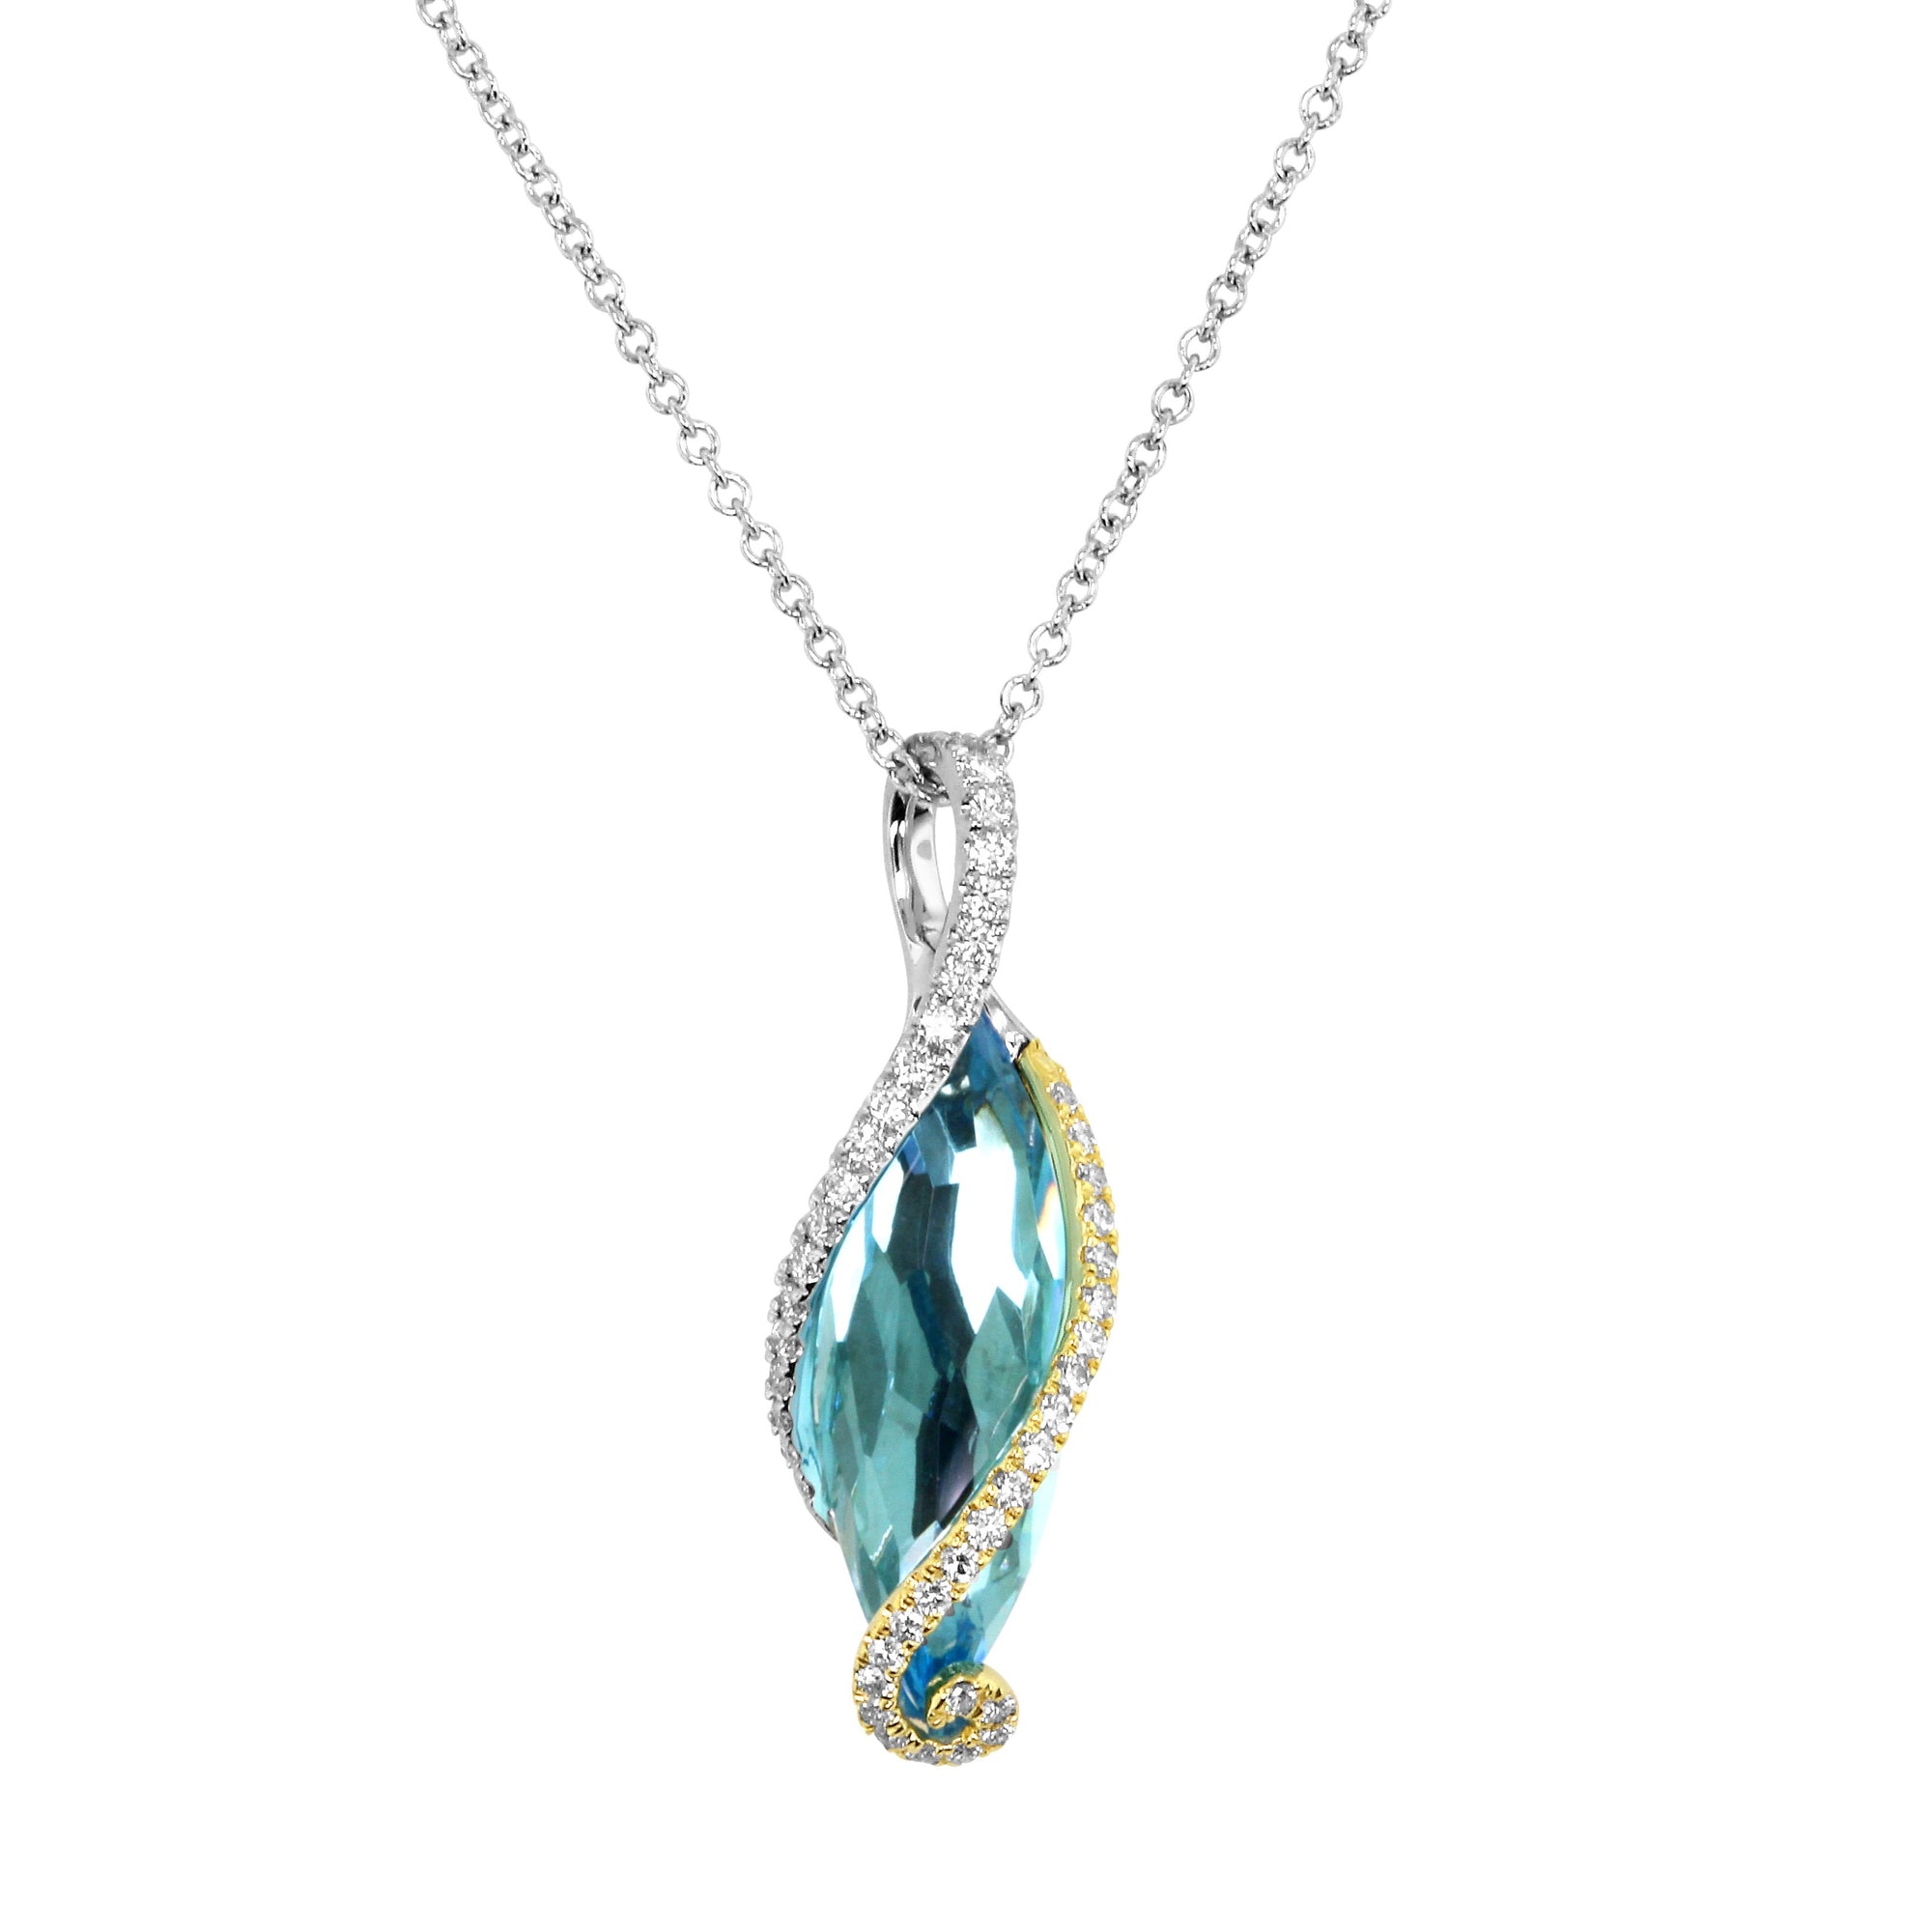 Bring out your inner ice goddess with this beautifully faceted, and richly colored Swiss blue topaz pendant necklace. The marquee cut gem weighs 5.90 cts and is wrapped with ribbons of 14k yellow and white gold set with 0.36 ct of white diamonds. It delicately hangs from a 16" white gold chain. 